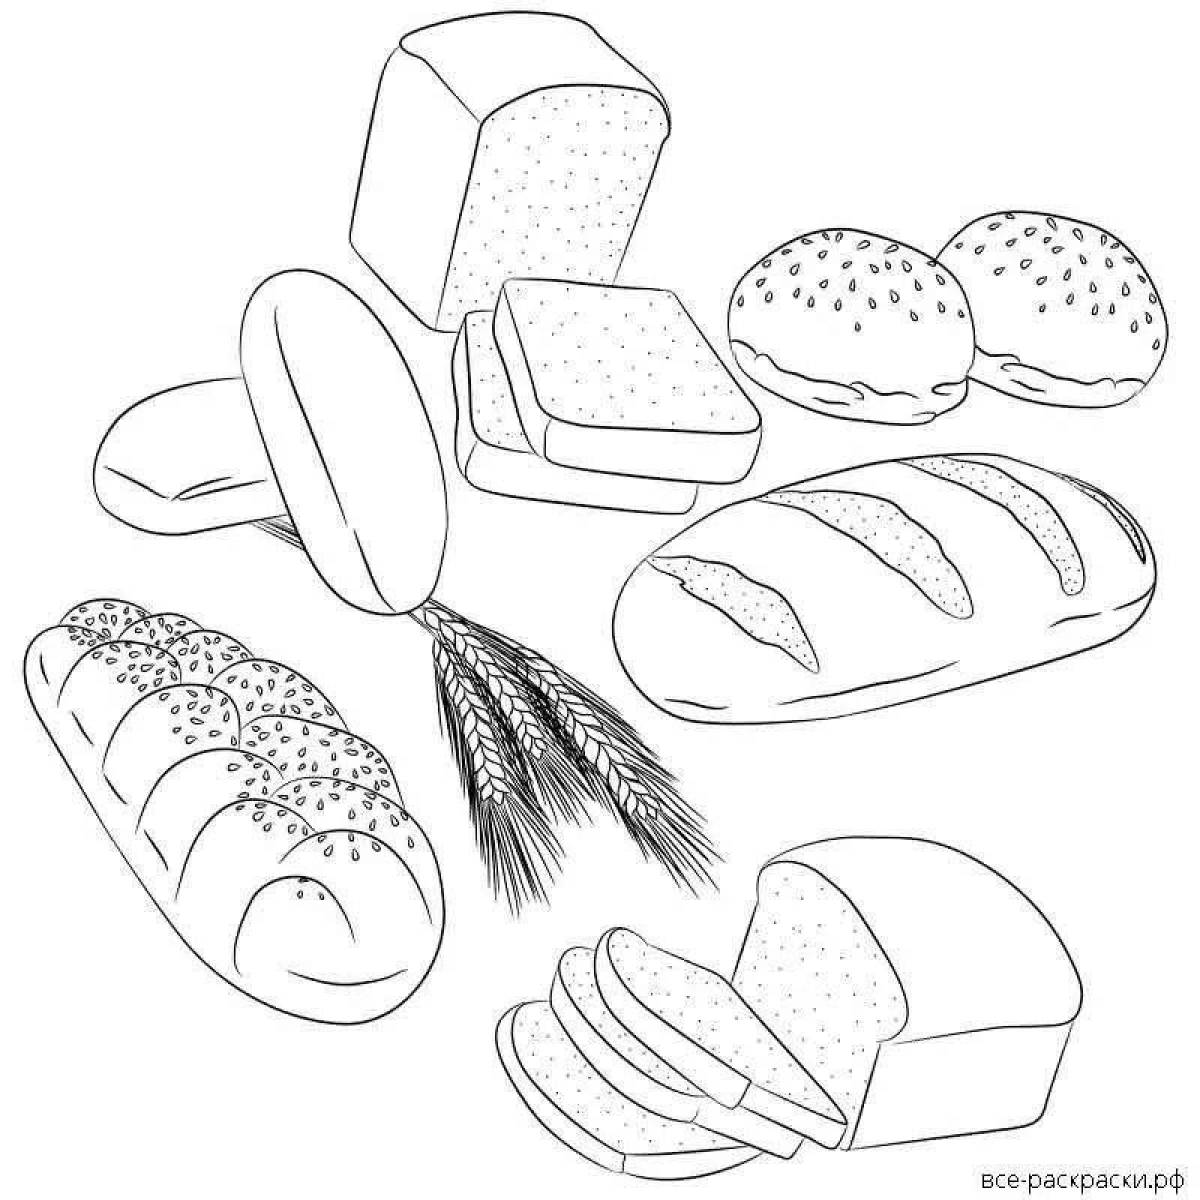 Bread and butter coloring page